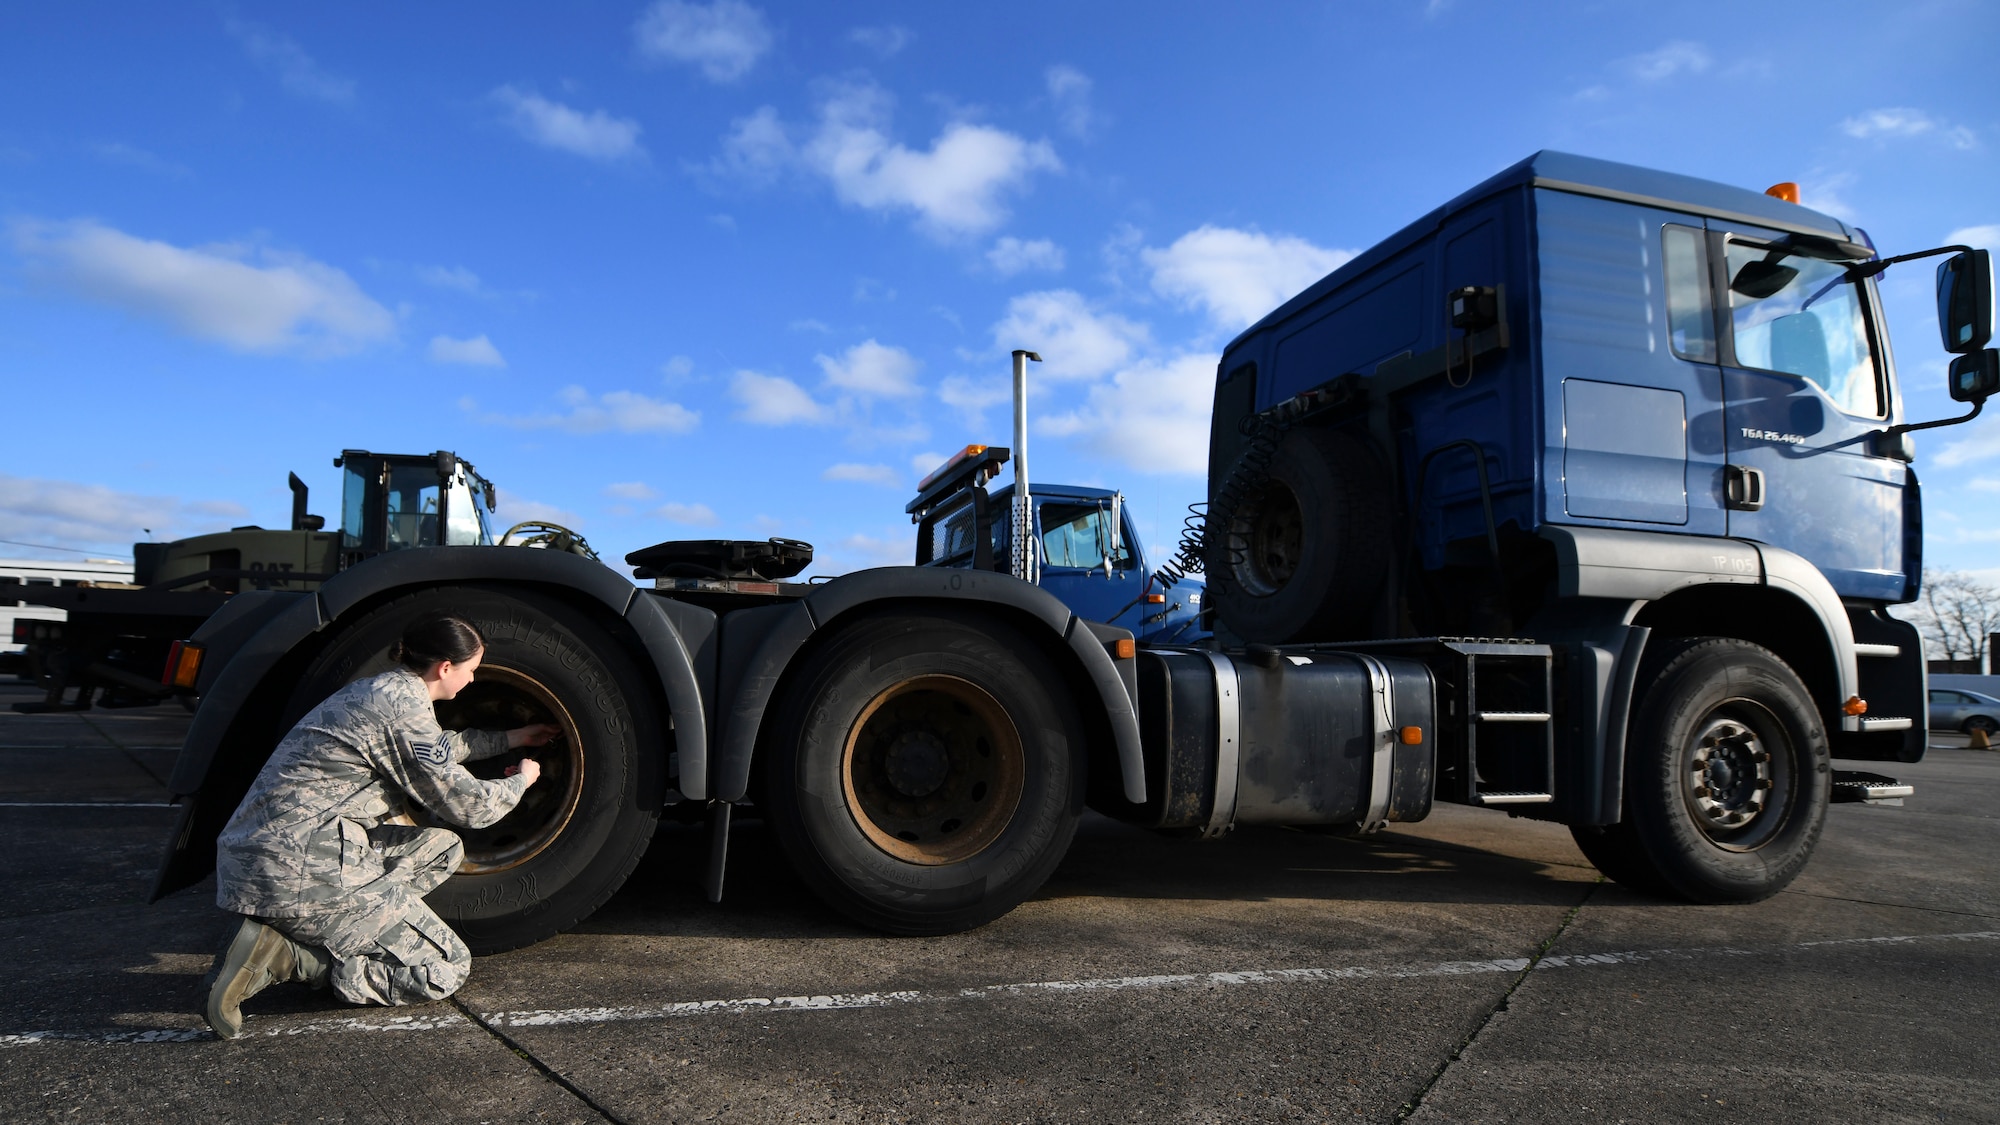 Staff Sgt. Garrison West, 100th Logistics Readiness Squadron mission generating vehicle equipment maintenance supervisor, checks the tire pressure of a semi-truck, Jan. 6, 2019, at RAF Mildenhall, England. The 100th LRS handles vehicle maintenance for RAF Mildenhall. (U.S. Air Force photo by Senior Airman Alexandria Lee)